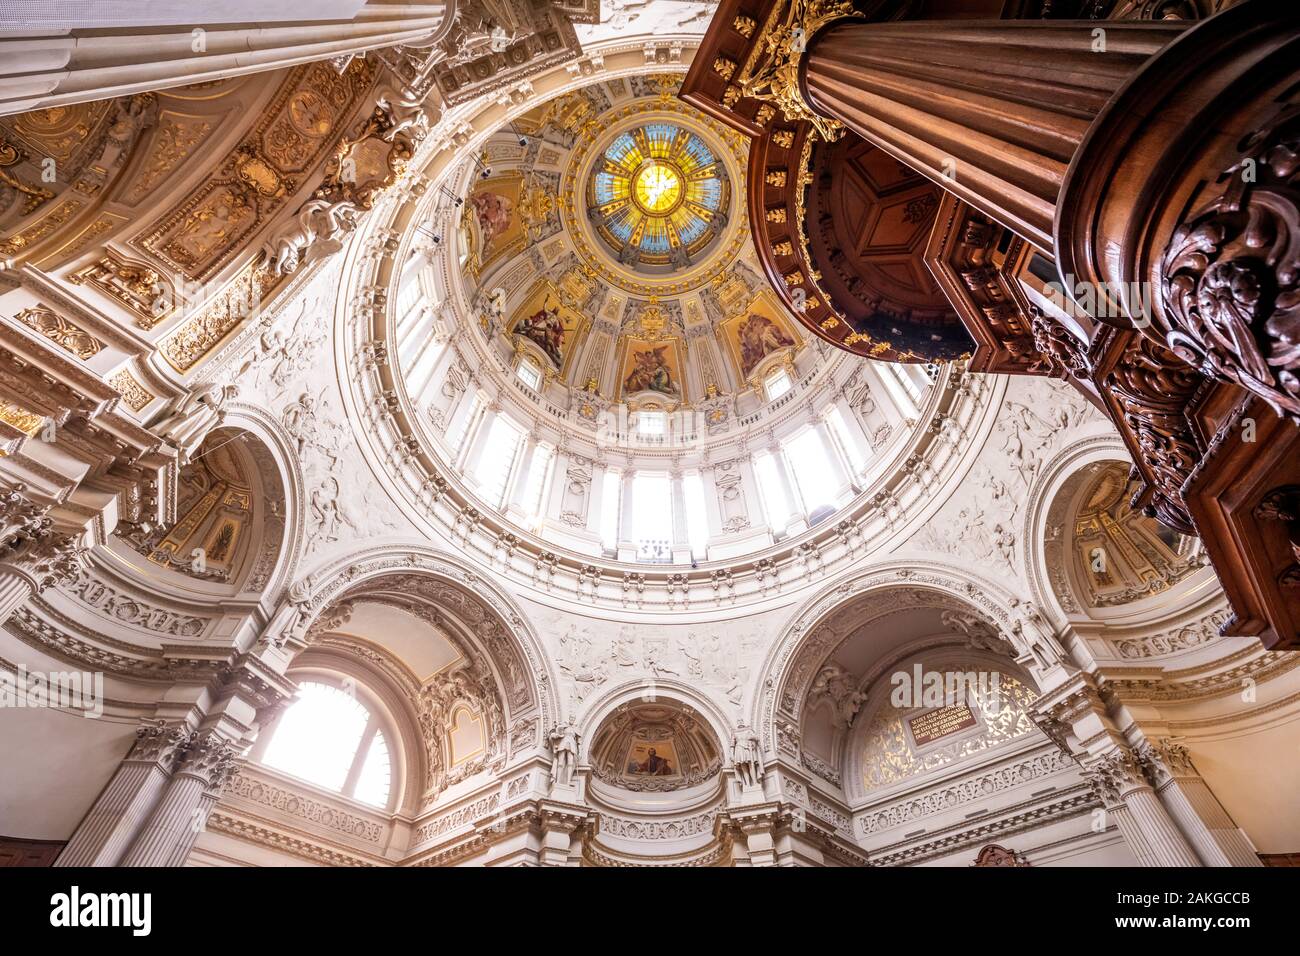 Wide angle view of the interior of the Berlin cathedral, with a large wooden pulpit in the foreground Stock Photo